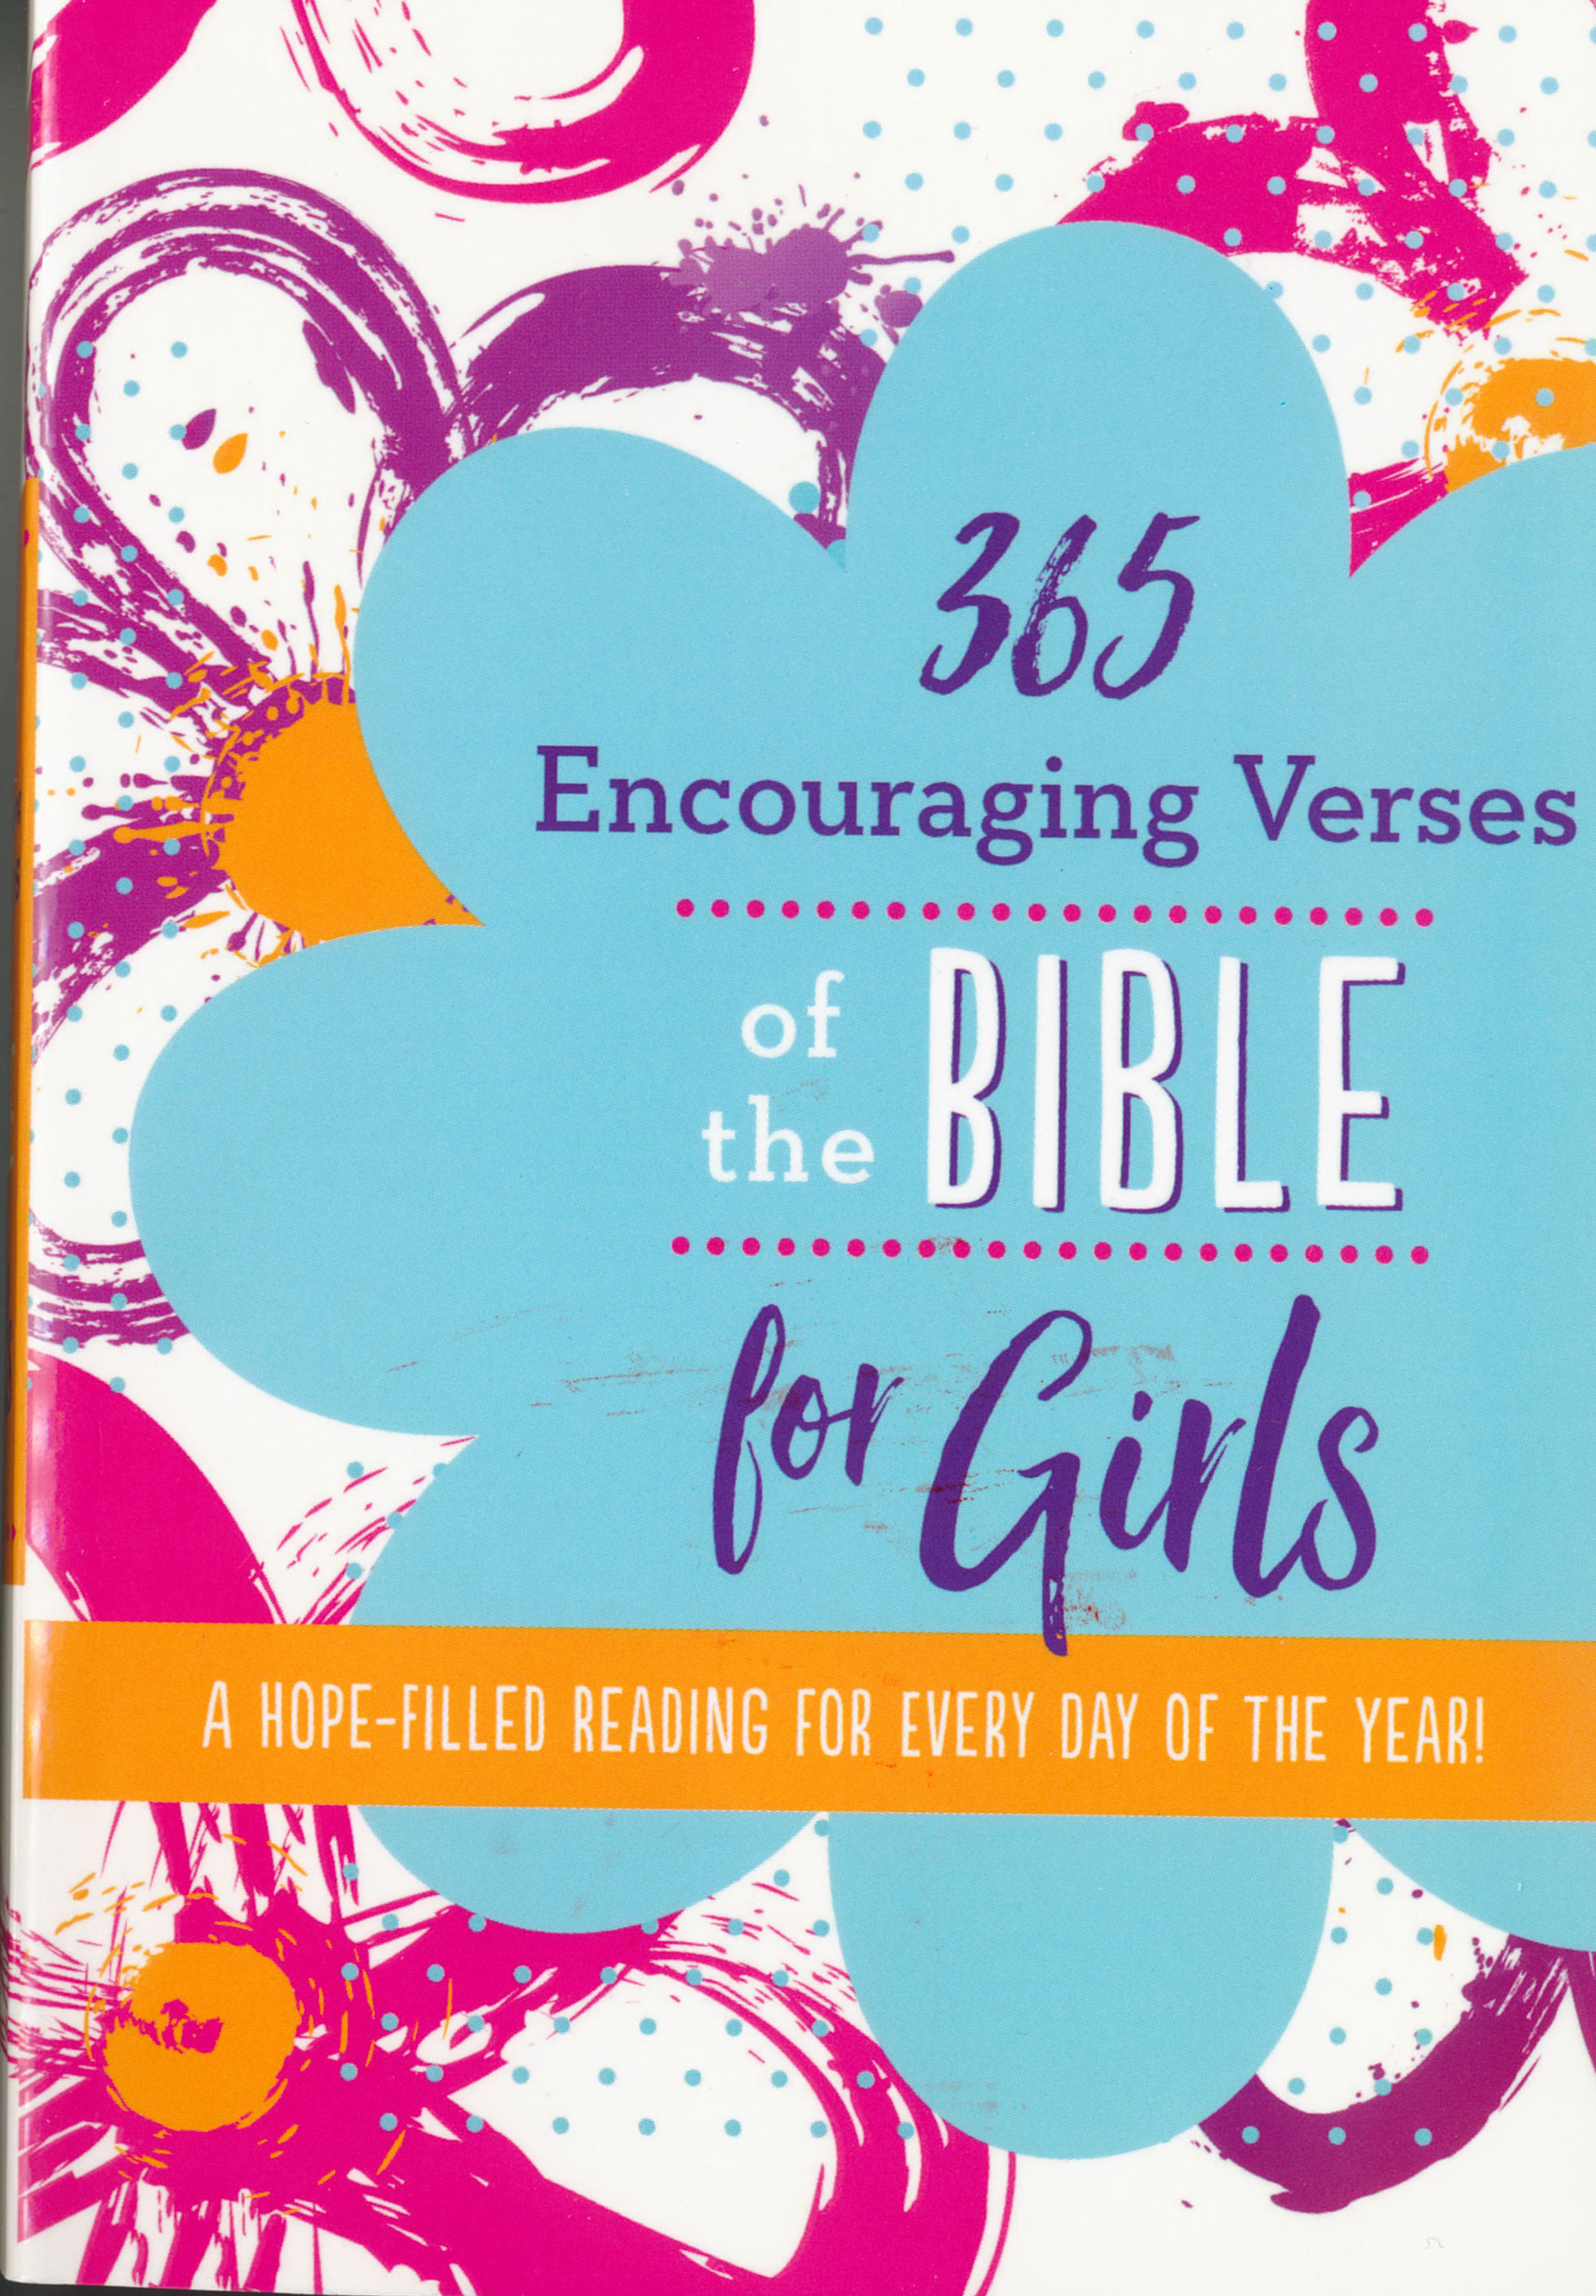 365 Encouraging Verses of the Bible for Girls from Barbour Books 108-9781683223481